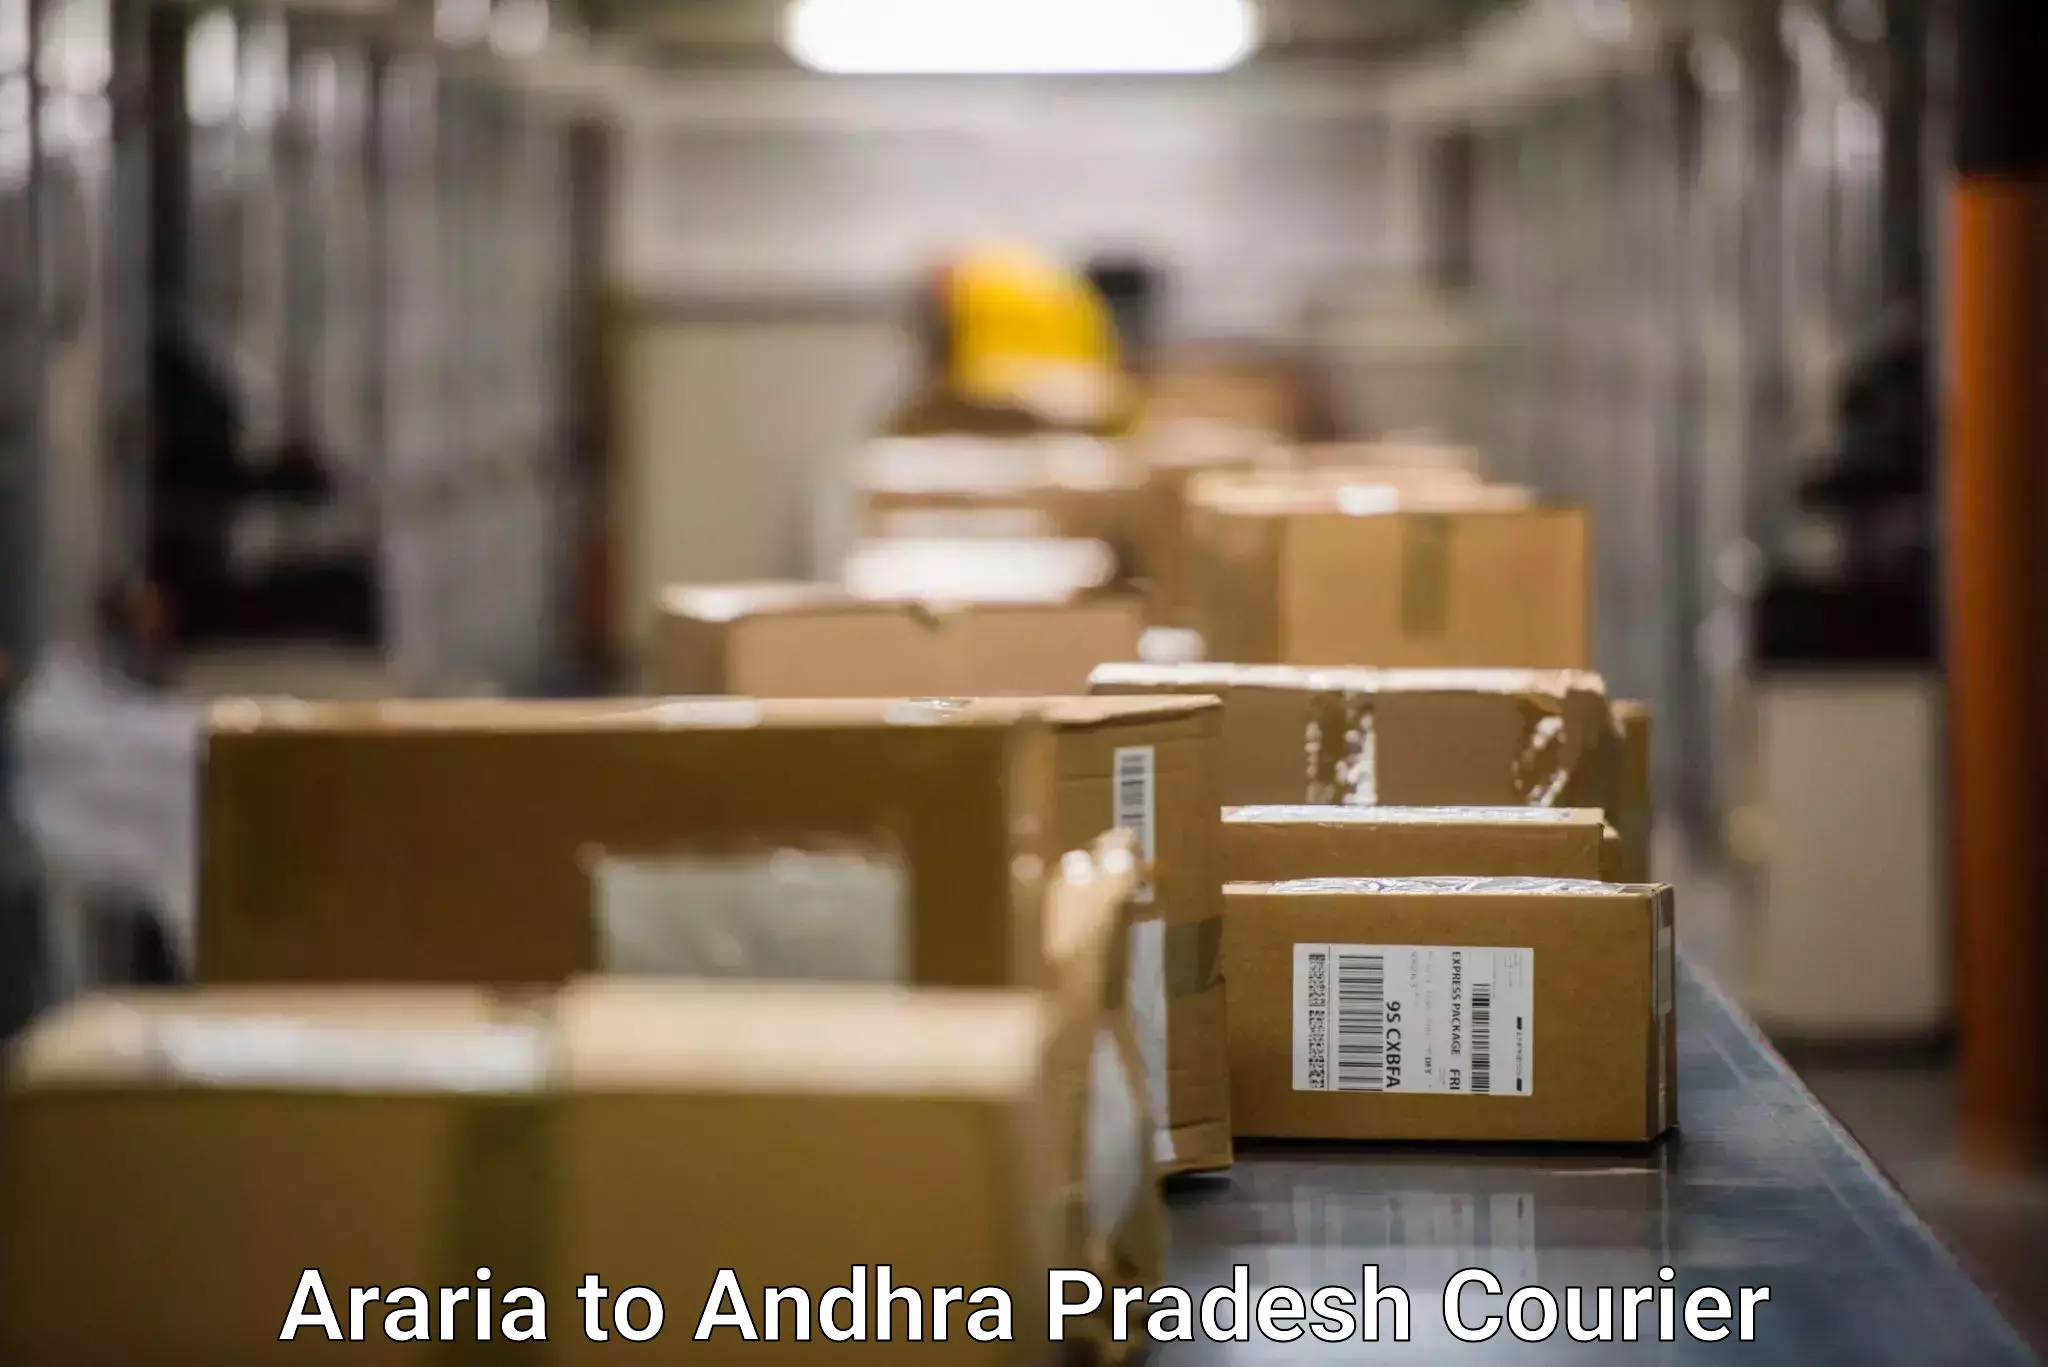 State-of-the-art courier technology Araria to Chintalapudi